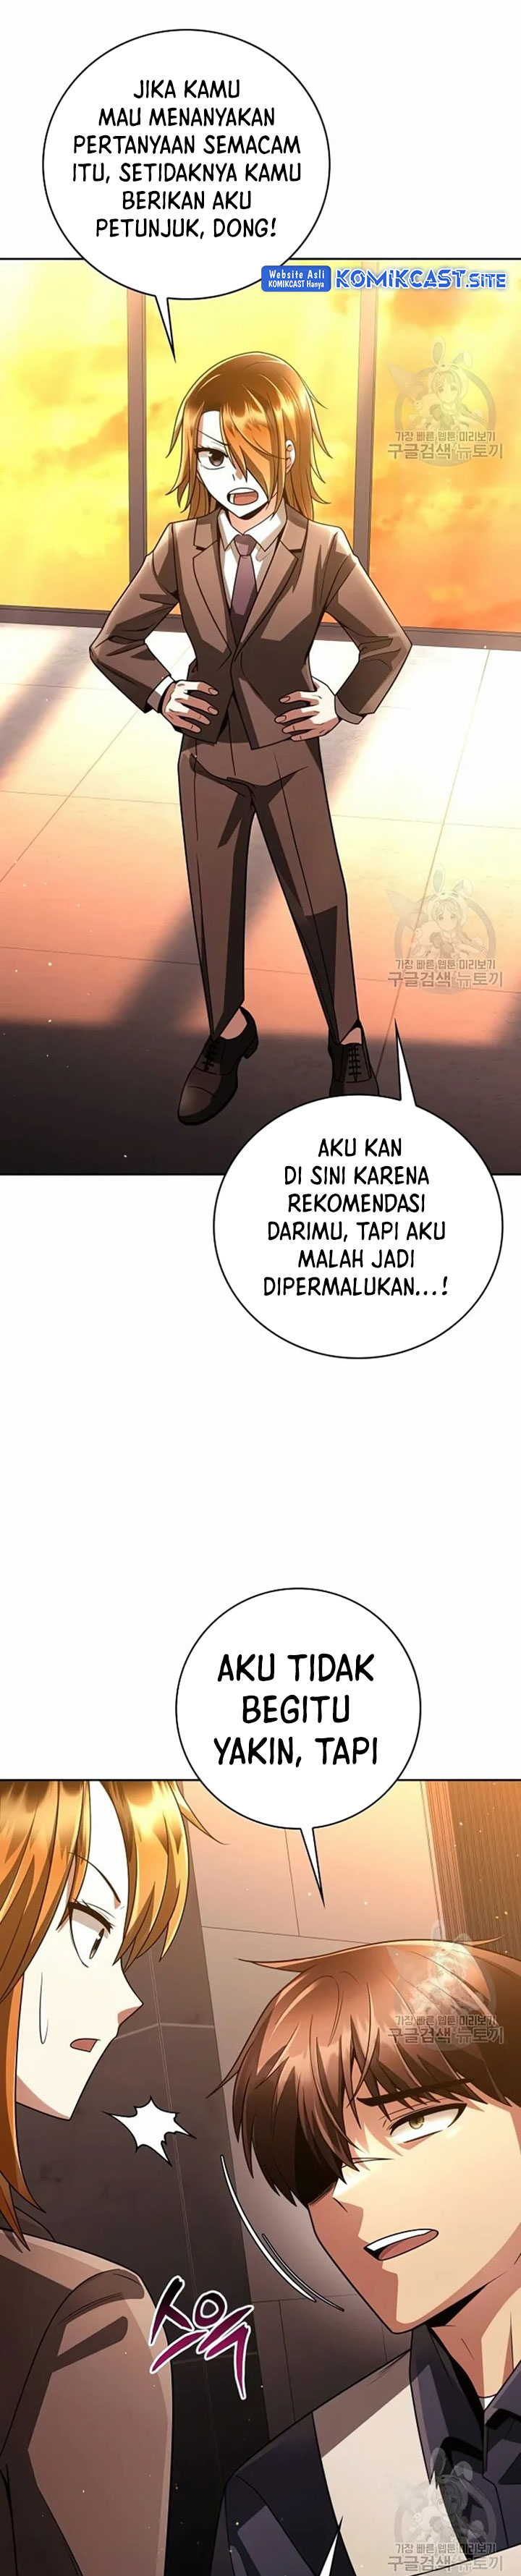 Dilarang COPAS - situs resmi www.mangacanblog.com - Komik clever cleaning life of the returned genius hunter 029 - chapter 29 30 Indonesia clever cleaning life of the returned genius hunter 029 - chapter 29 Terbaru 19|Baca Manga Komik Indonesia|Mangacan